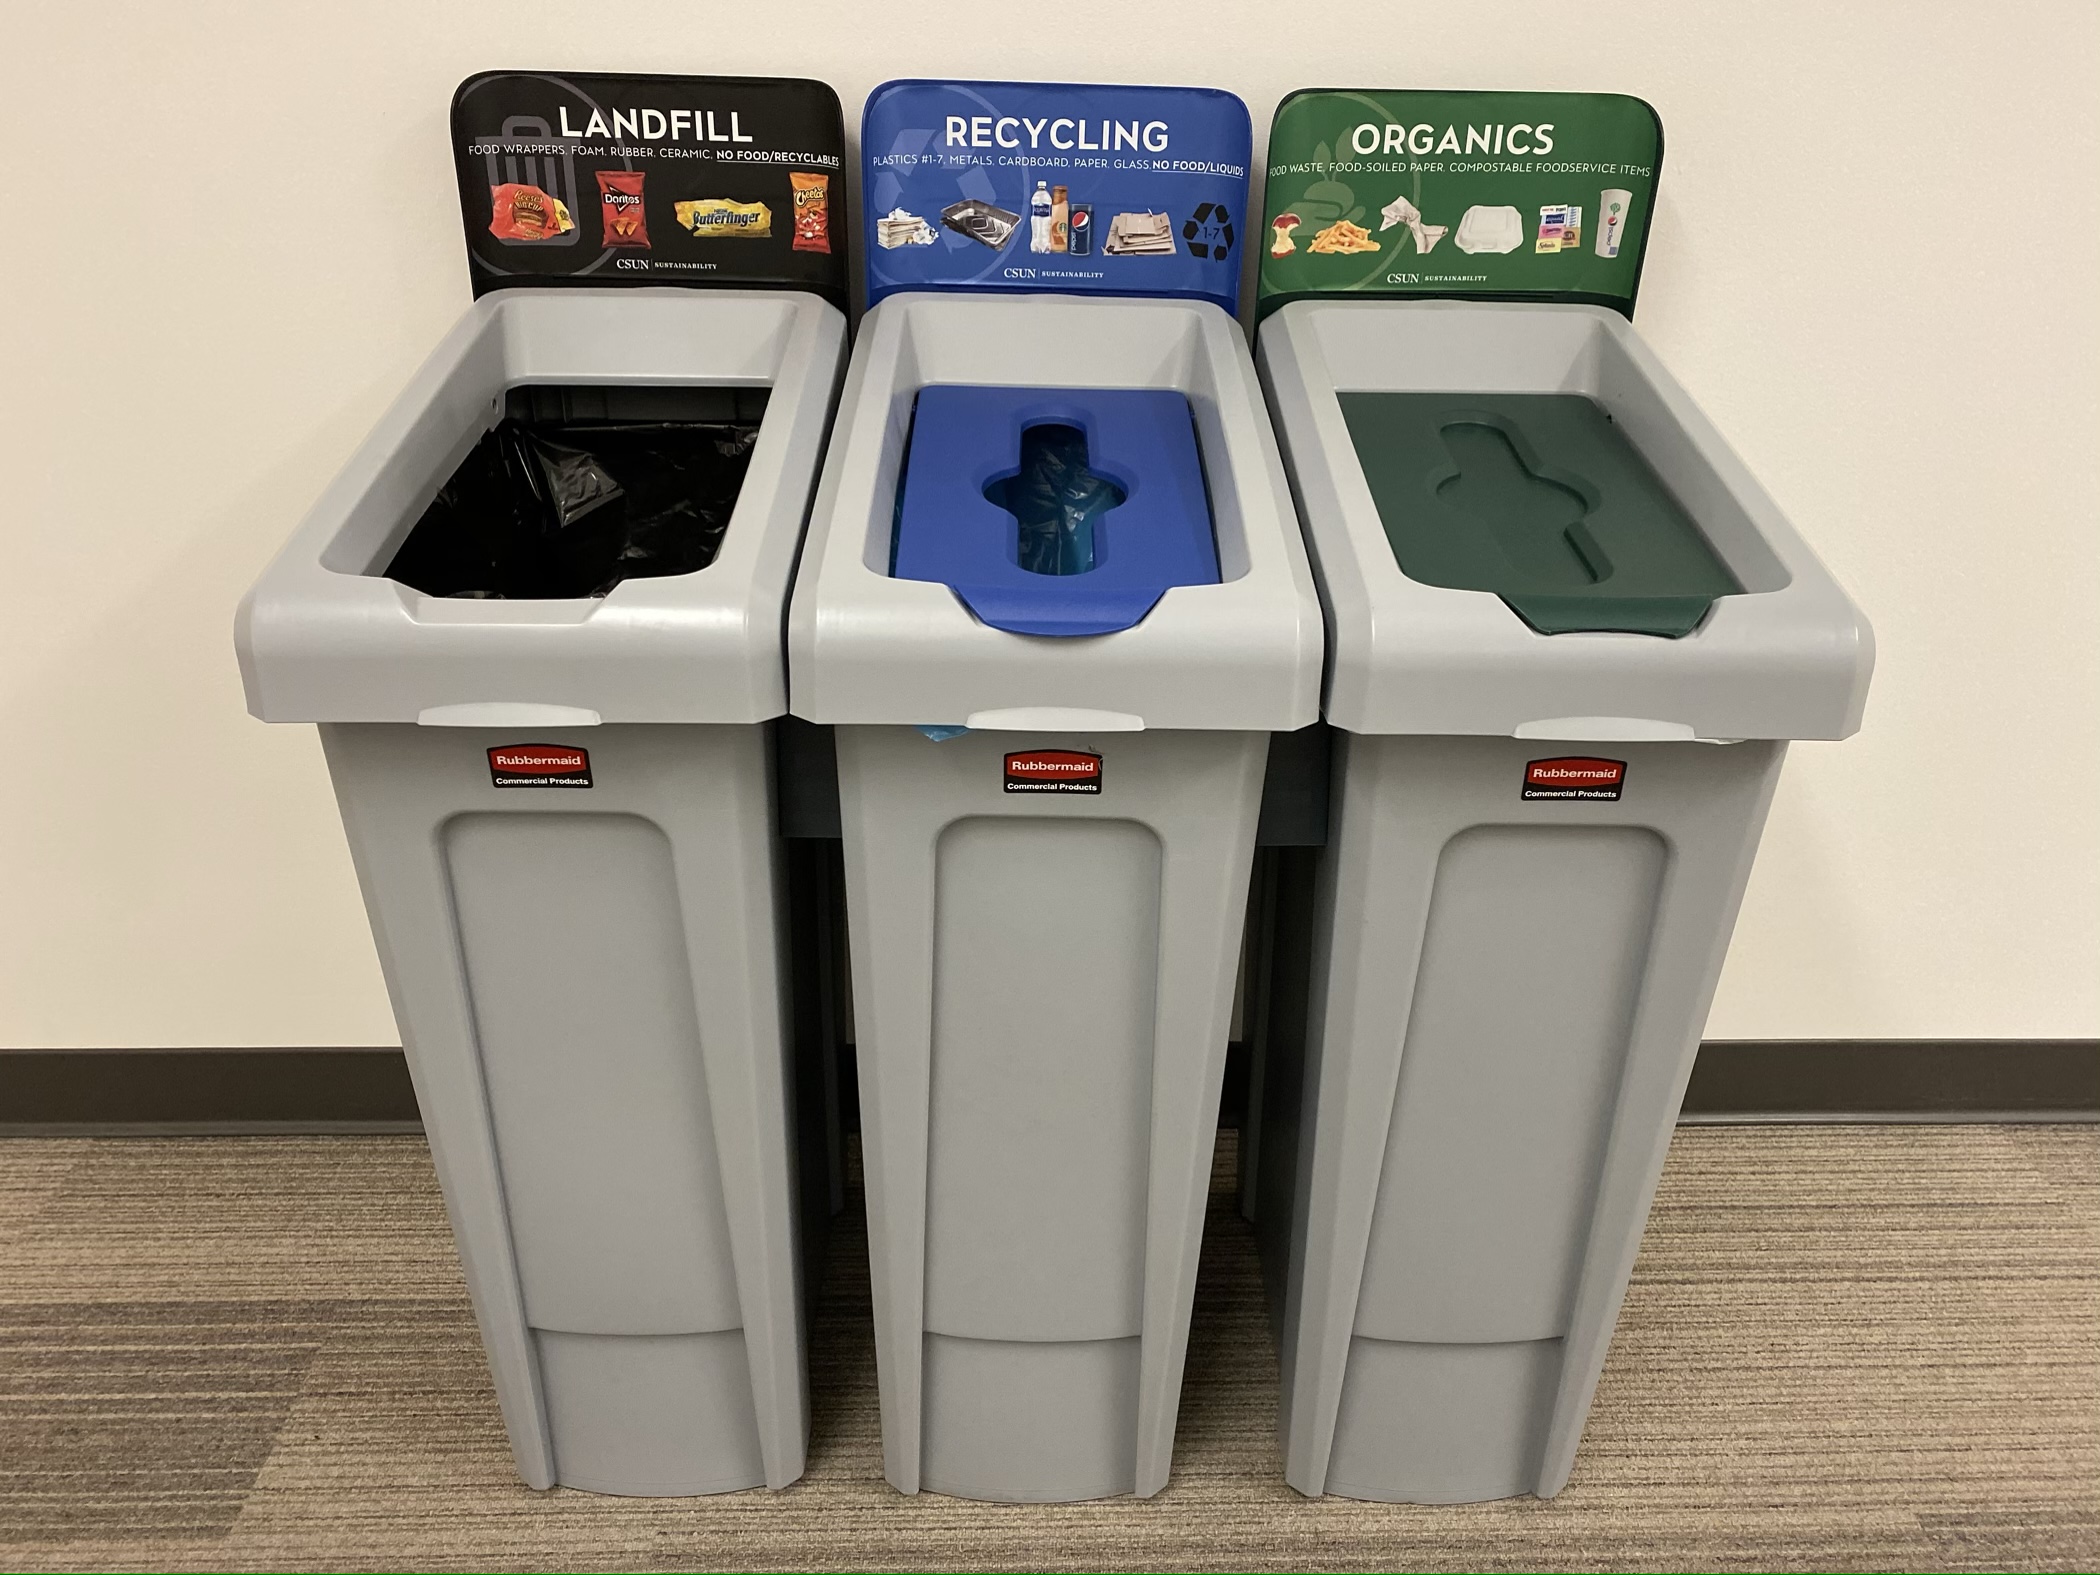 3 gray bins with black landfill, blue recycle and green organics title cards.